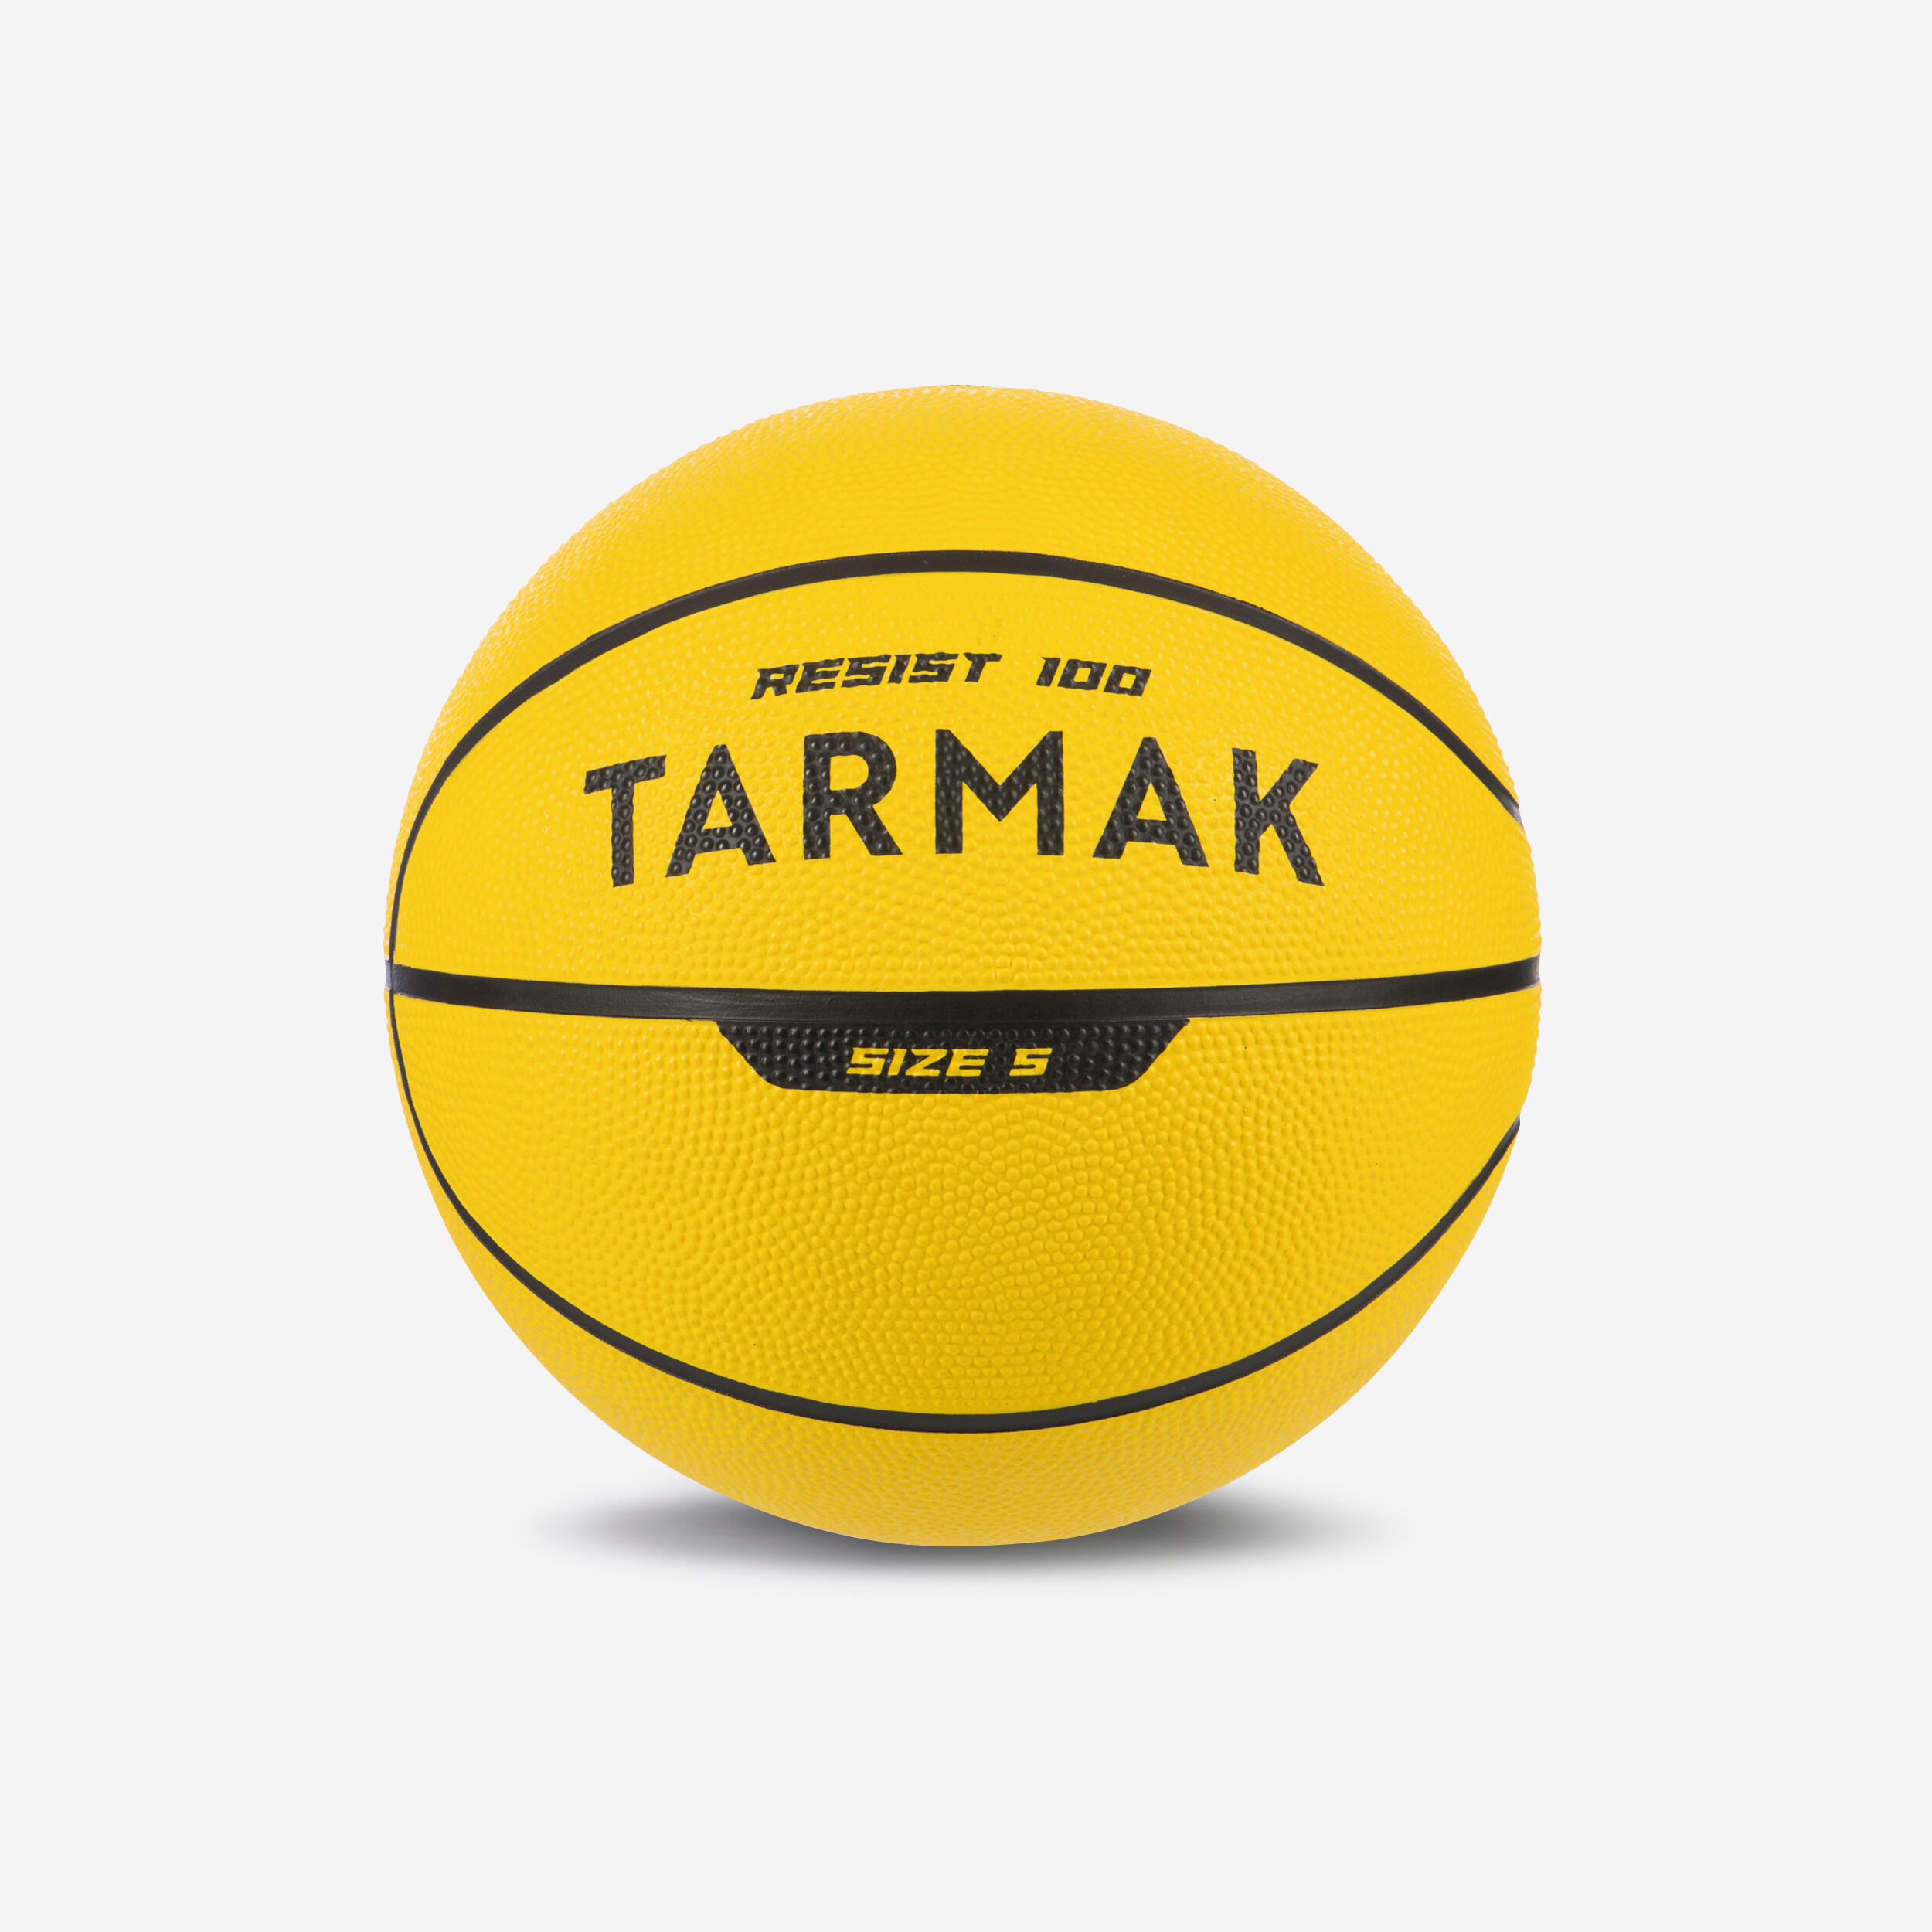 TARMAK Beginners' Size 5 (Up to 10 Years Old) Basketball R100 - Yellow